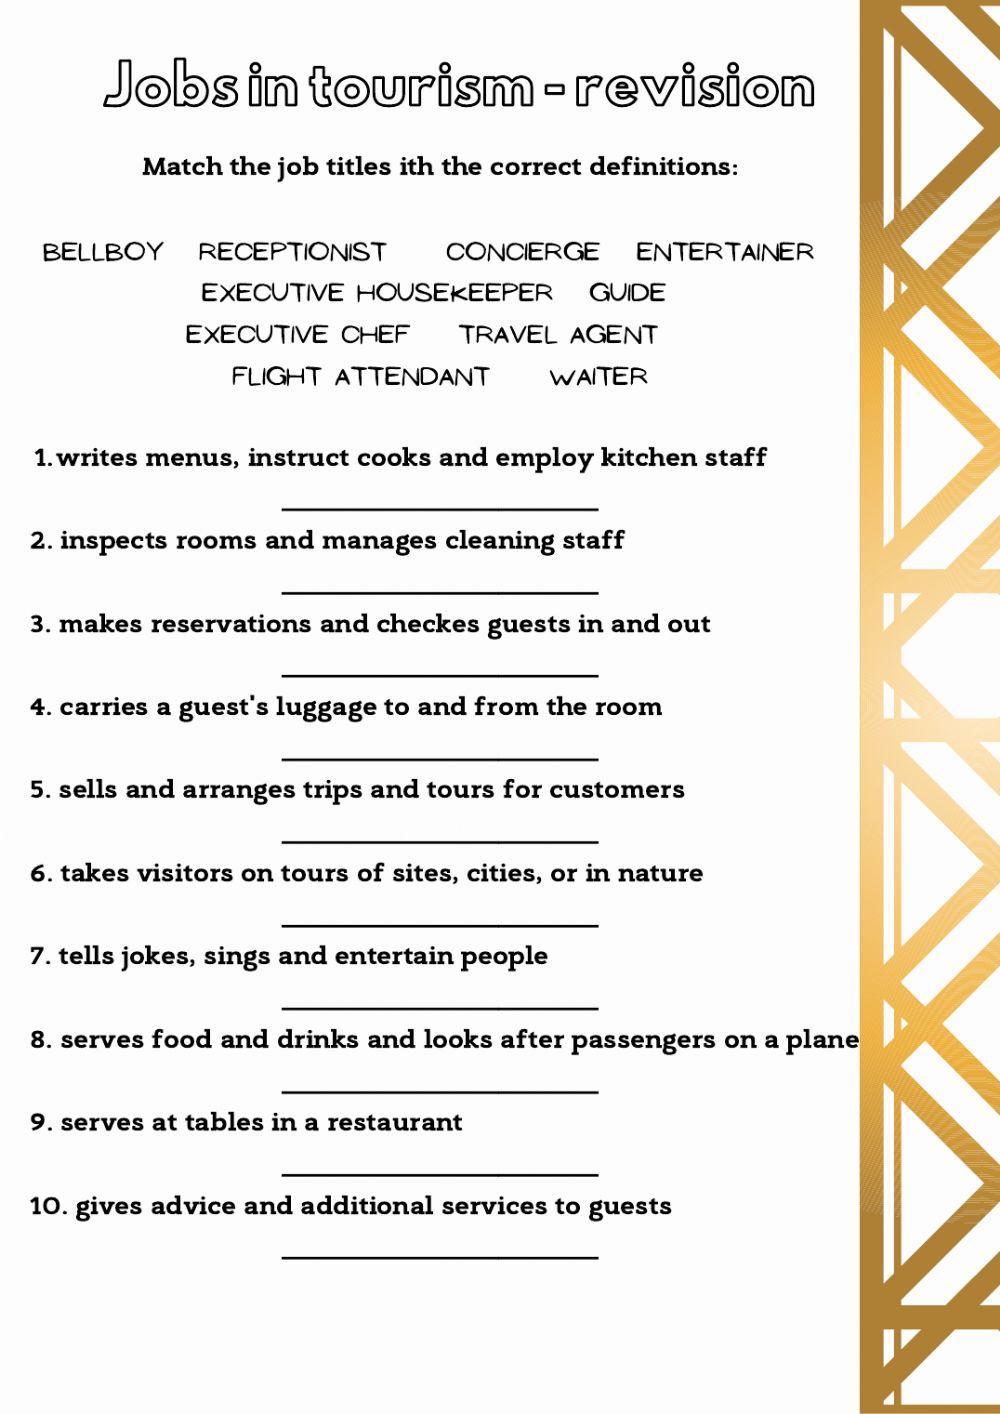 Jobs in tourism - revision